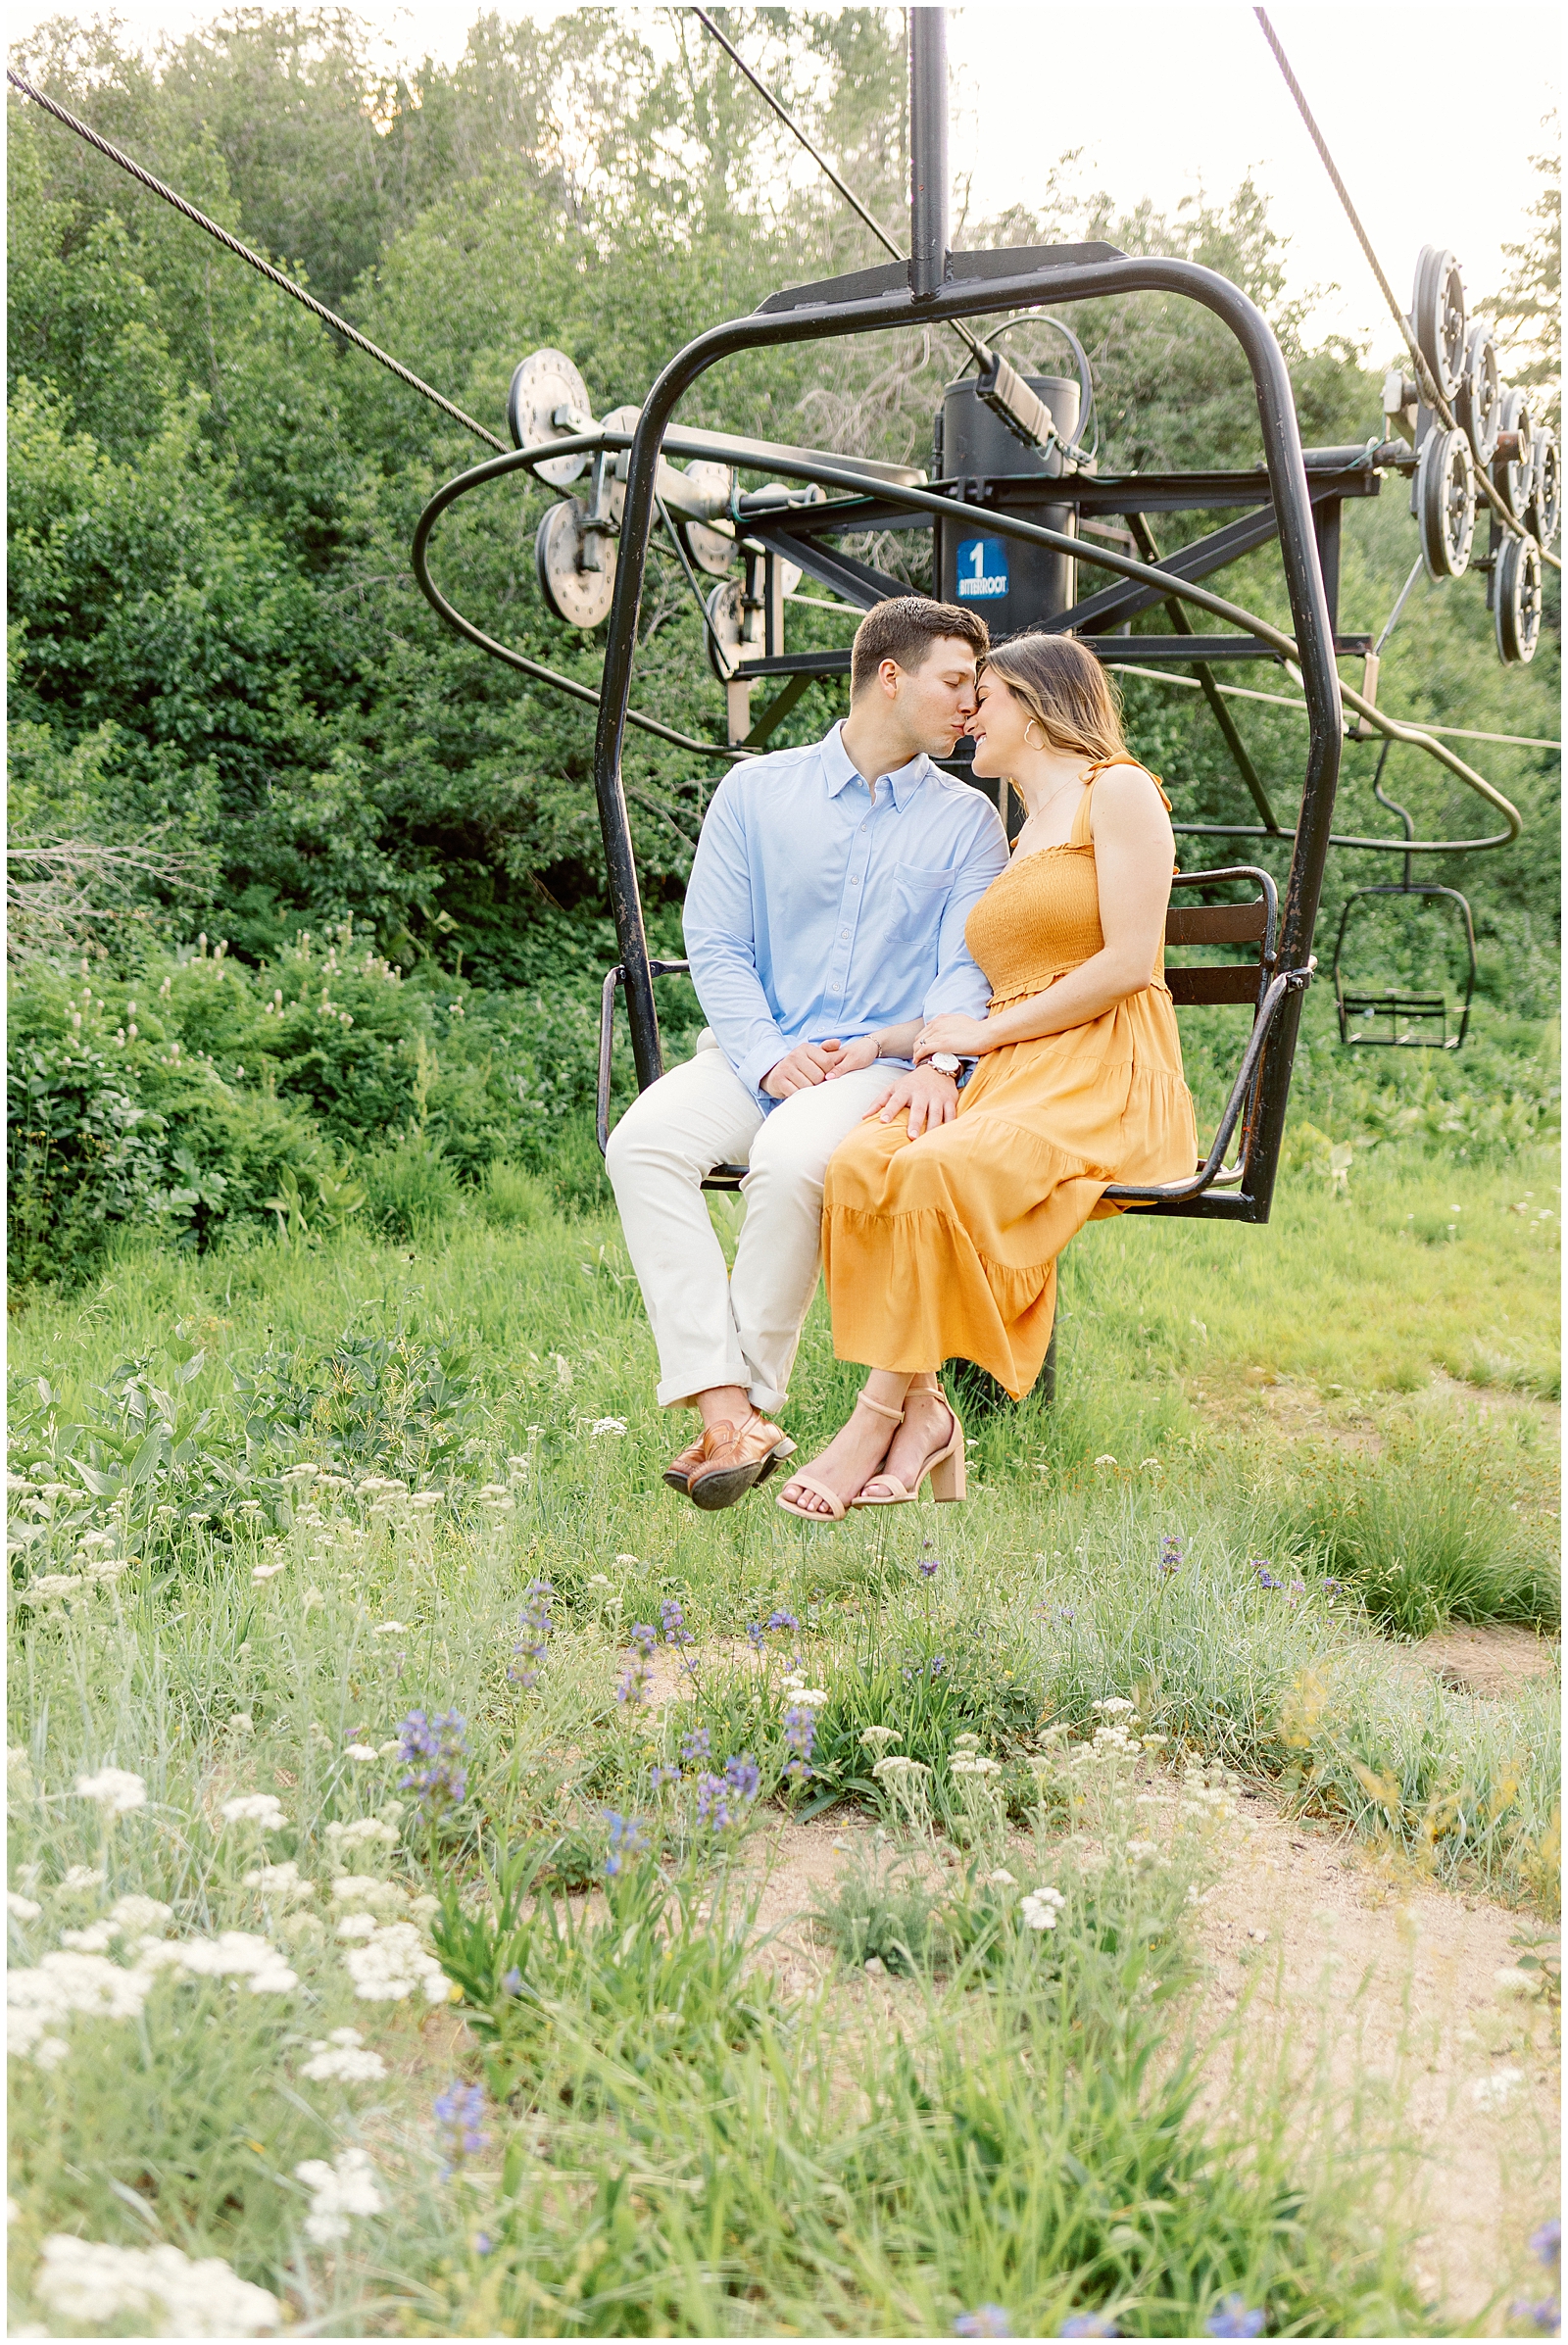 Summer Idaho Mountain Engagement at Bogus Basin in Chairlift